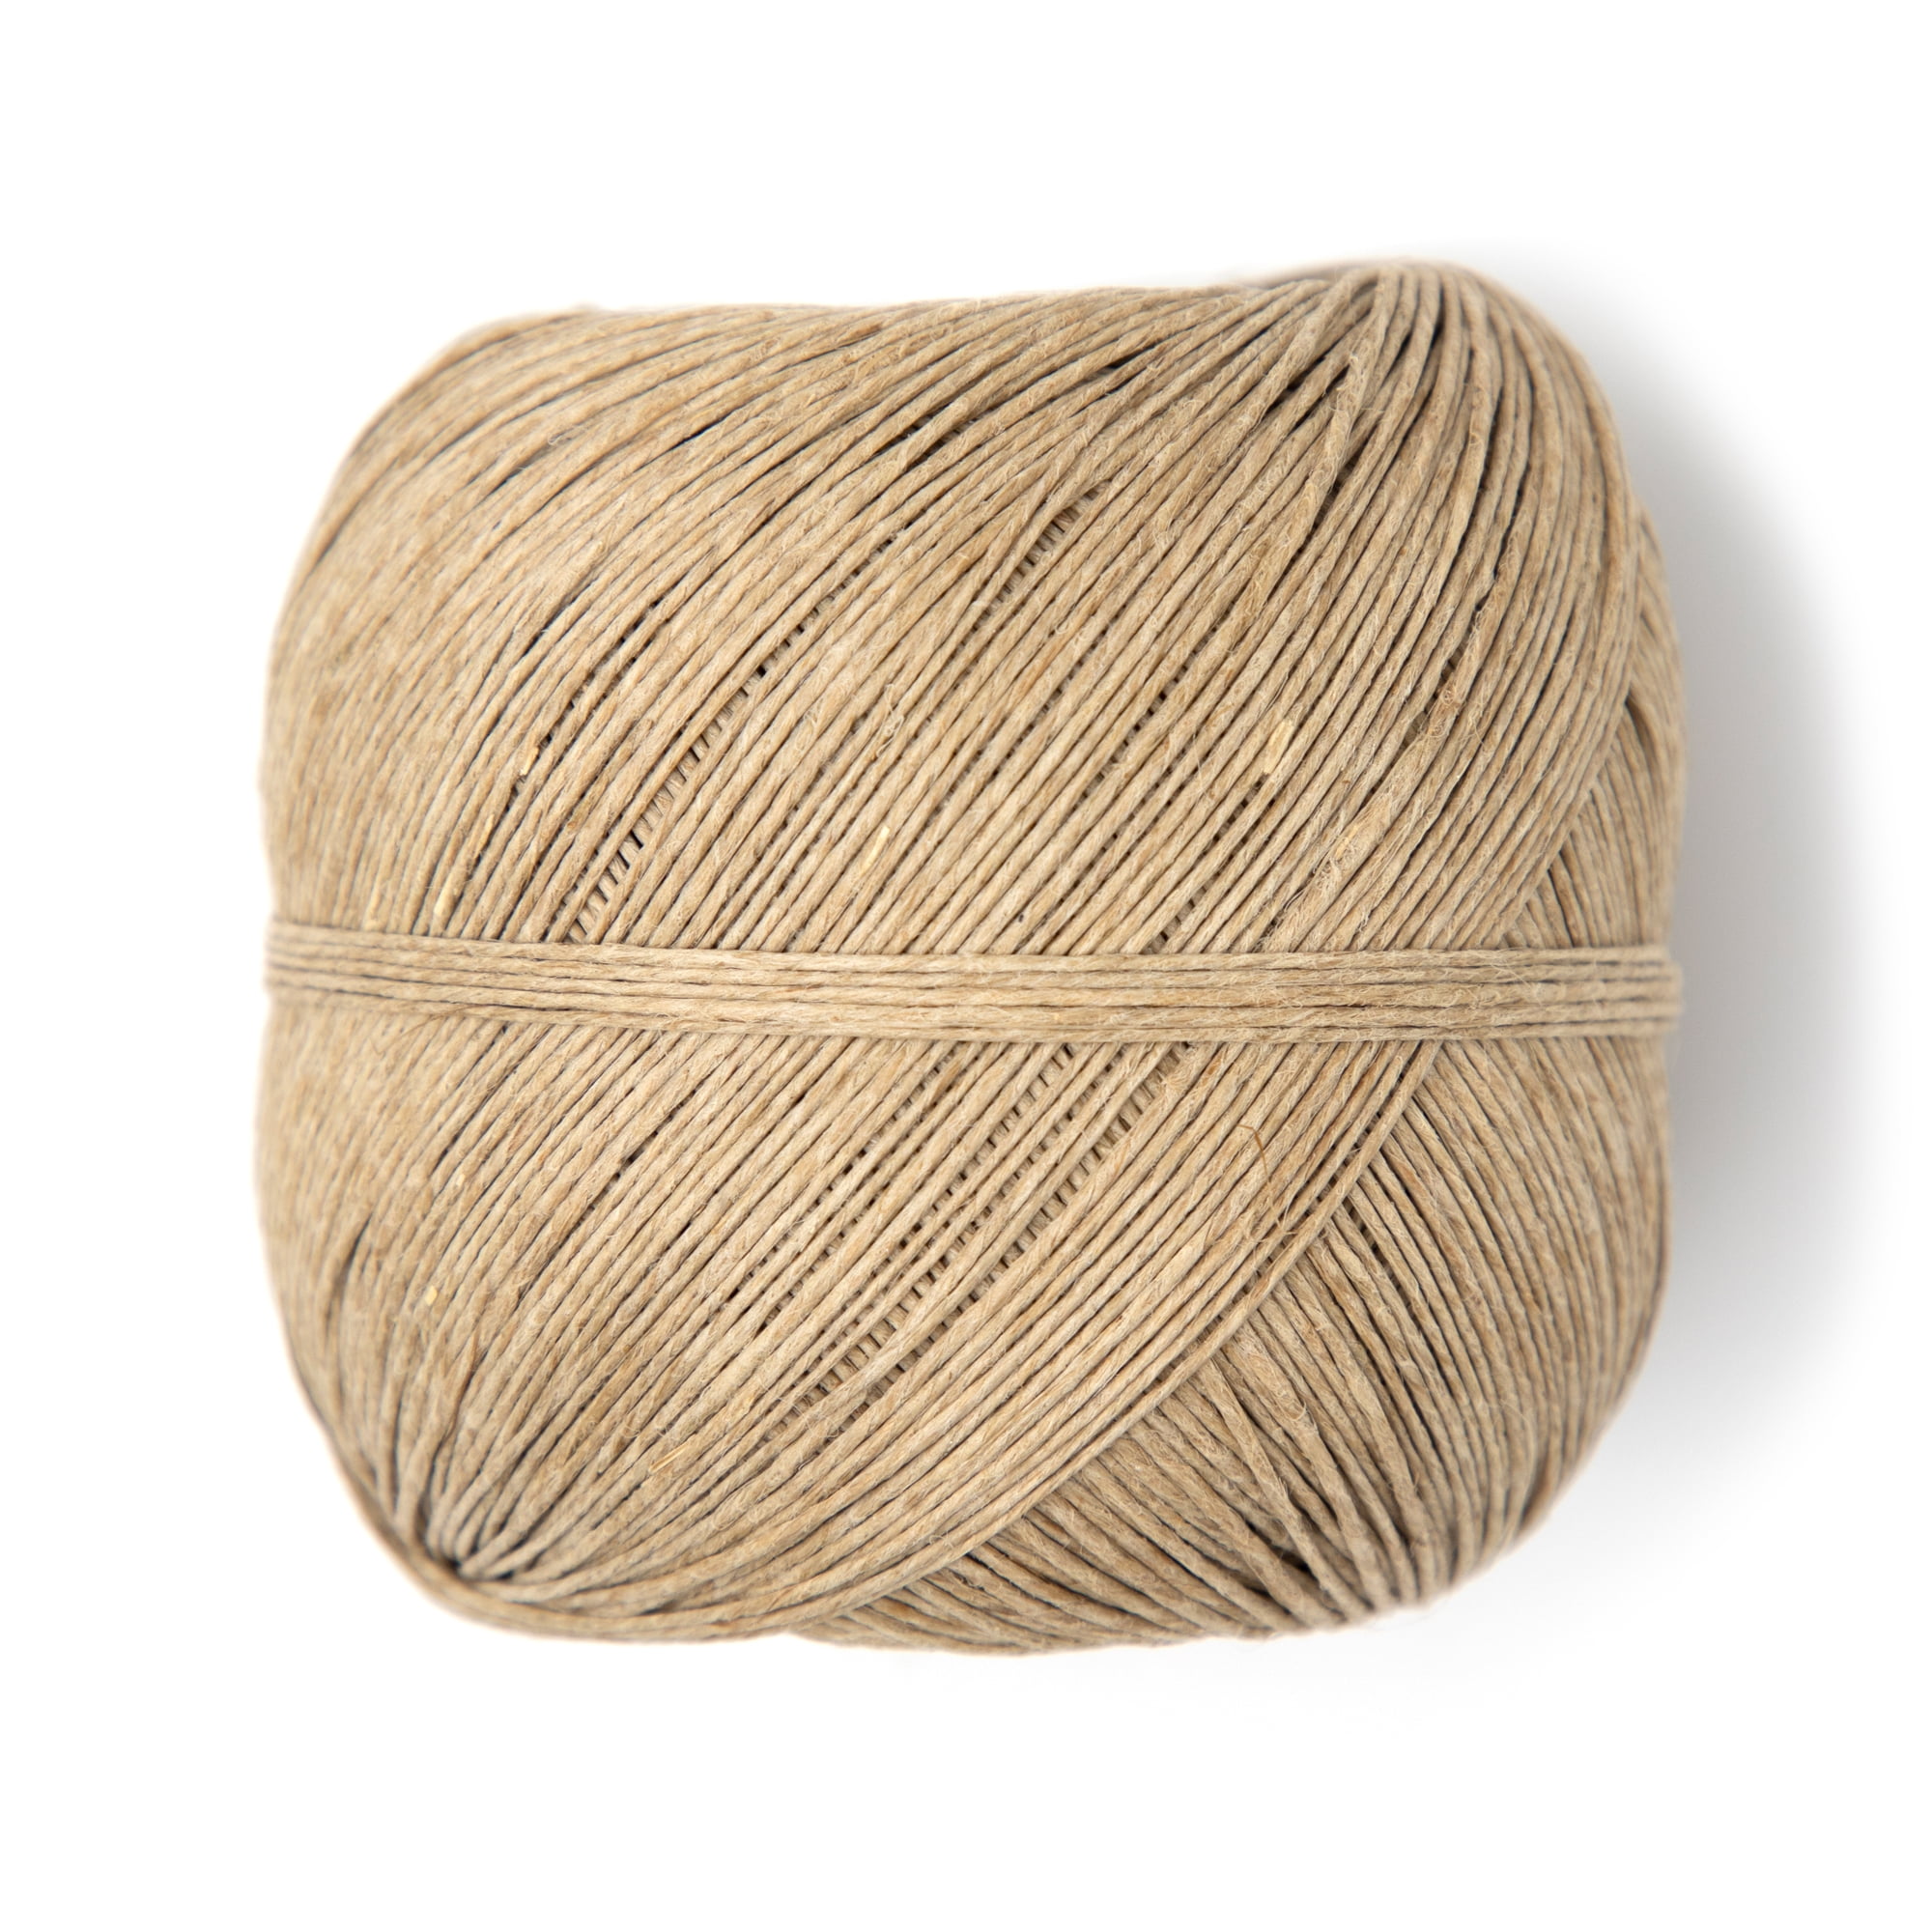 Bundle of round brown thin hemp rope with fiber texture isolated on a white  background.Twine